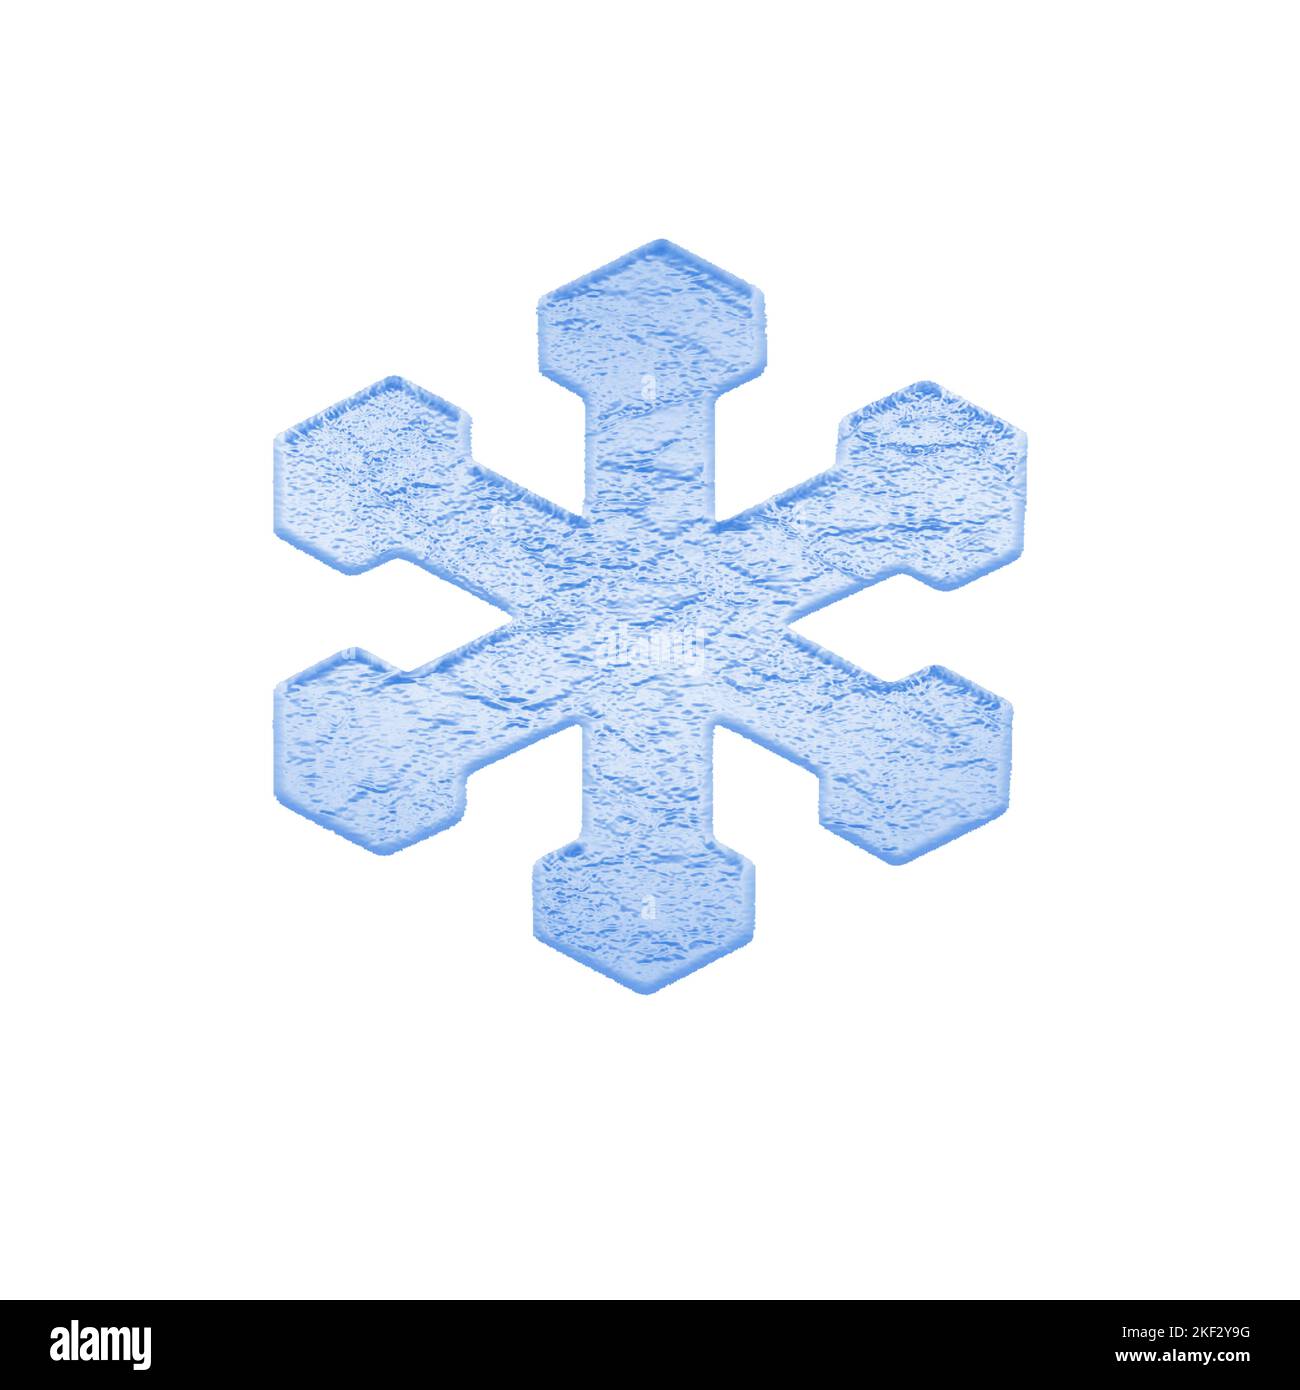 Digitally created winter snowflakes isolated on white background. Stock Photo